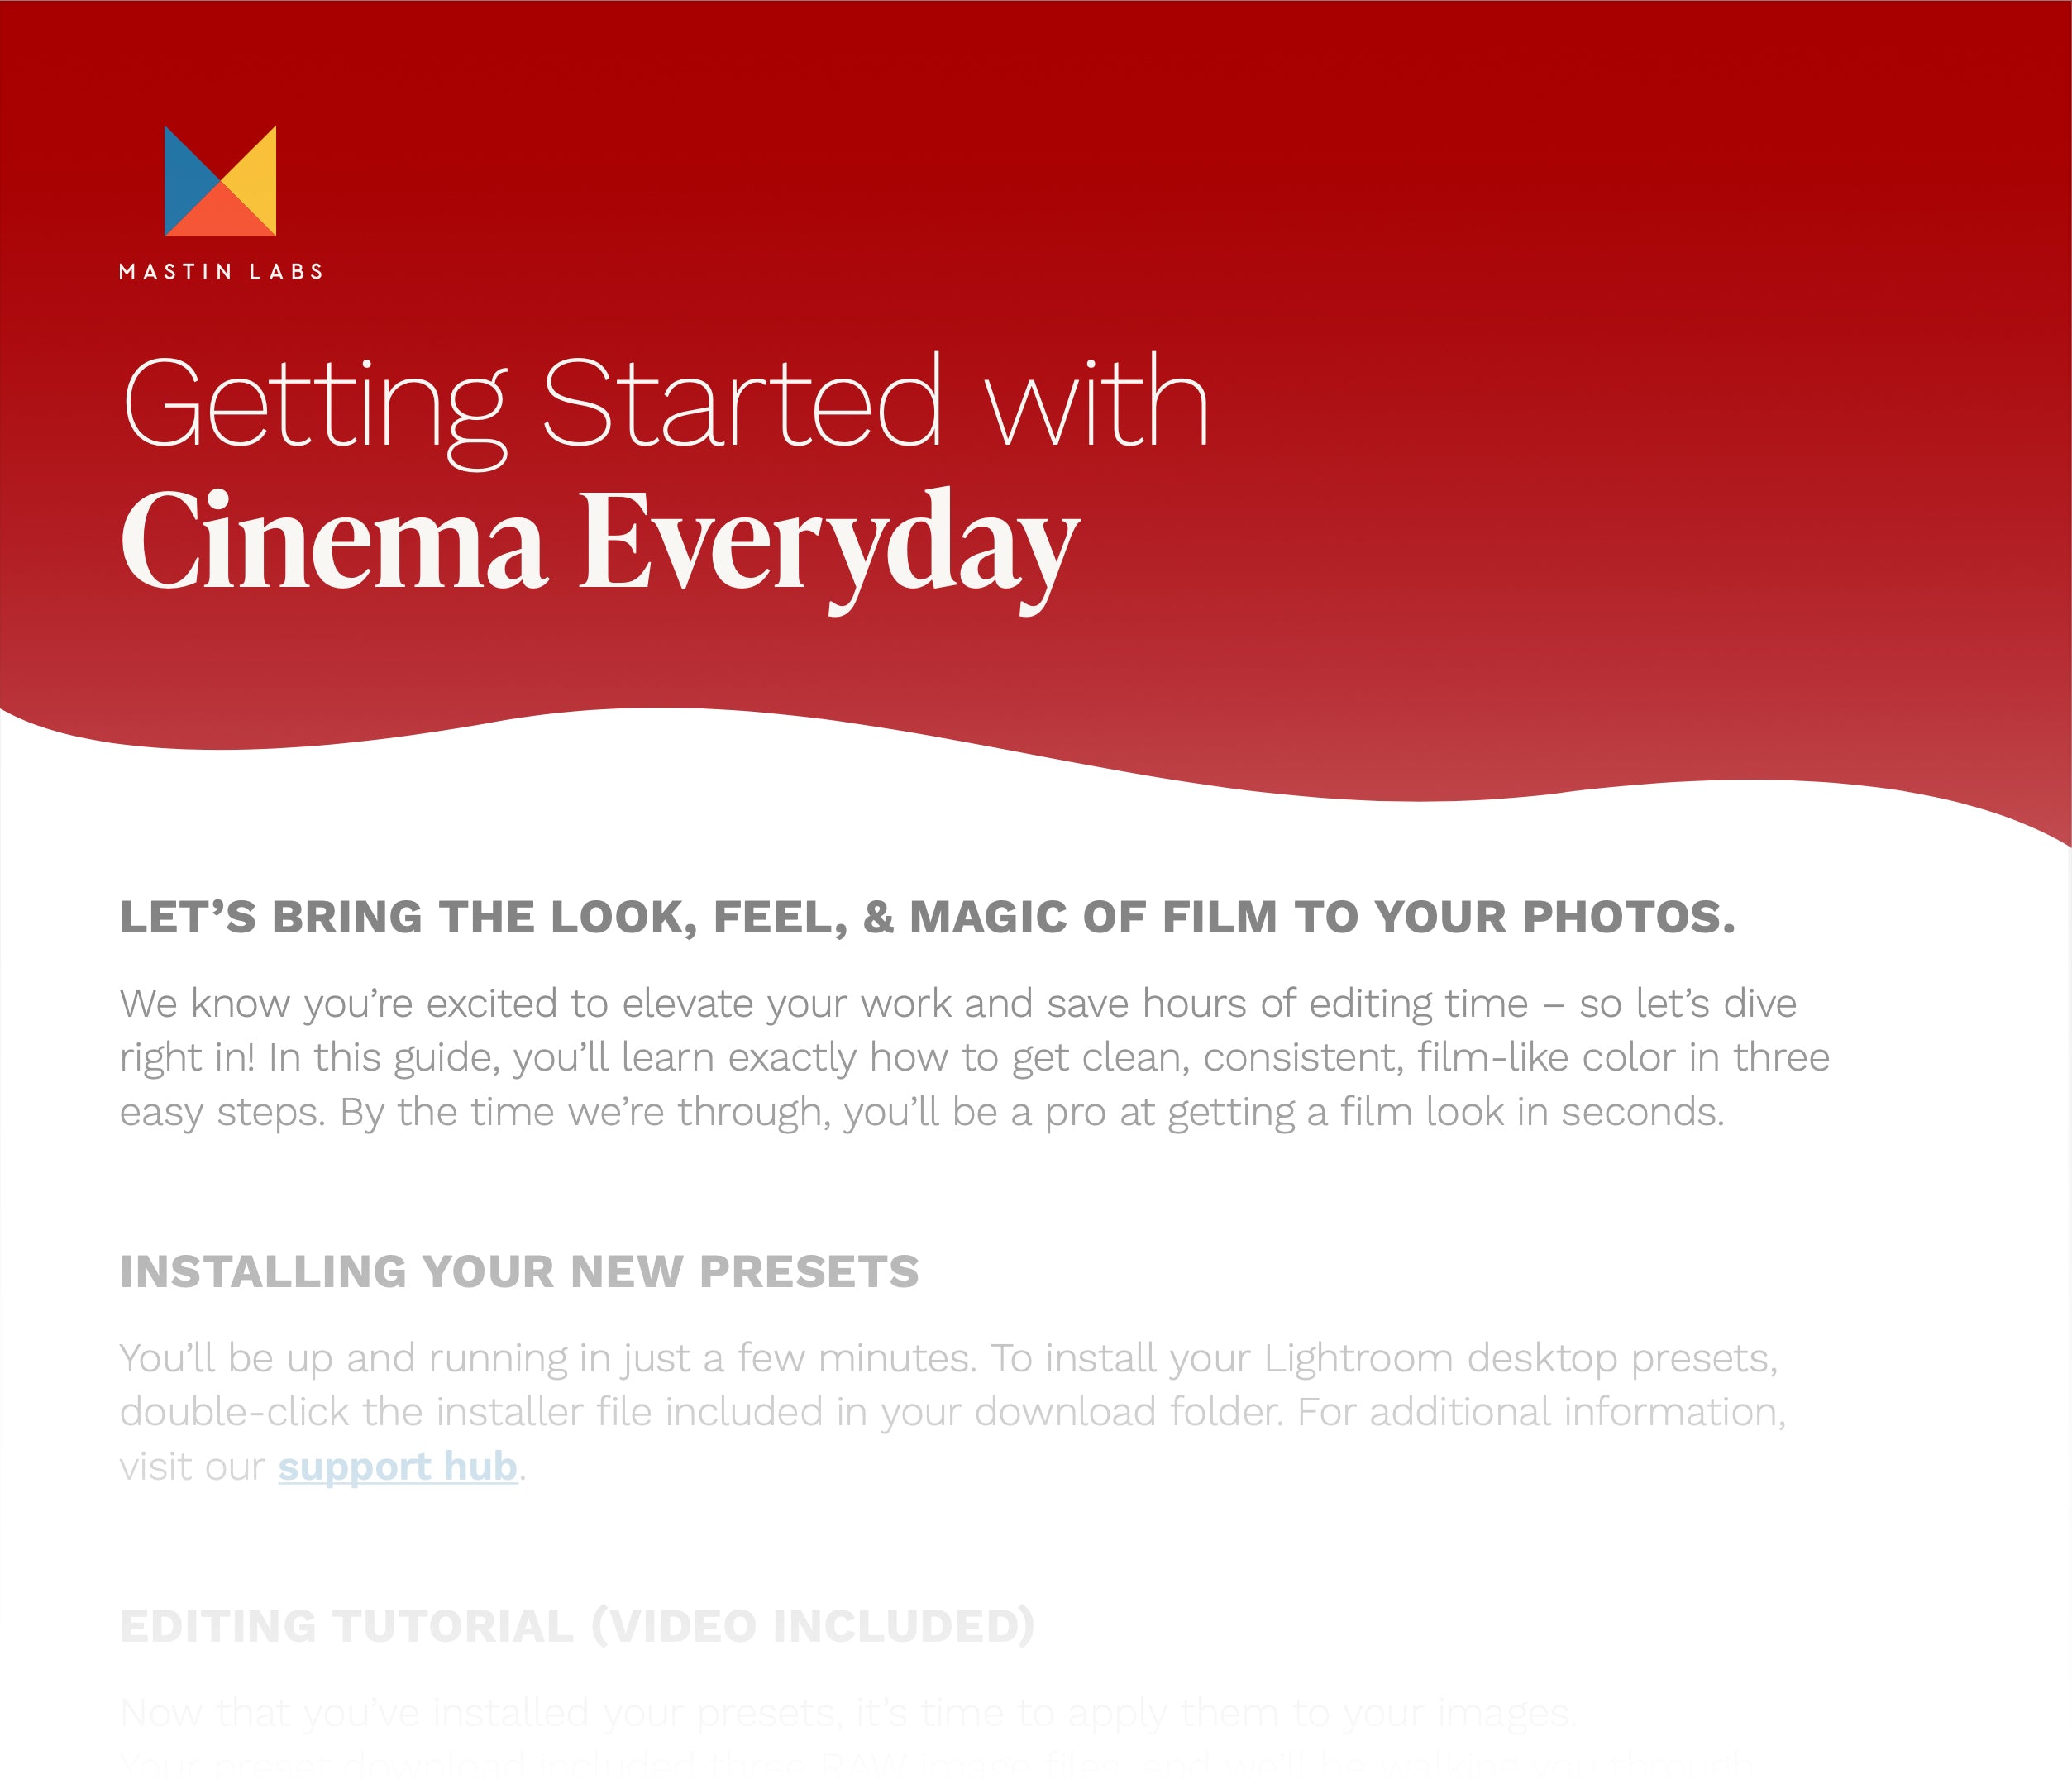 mastin labs cinema everyday getting started guide example